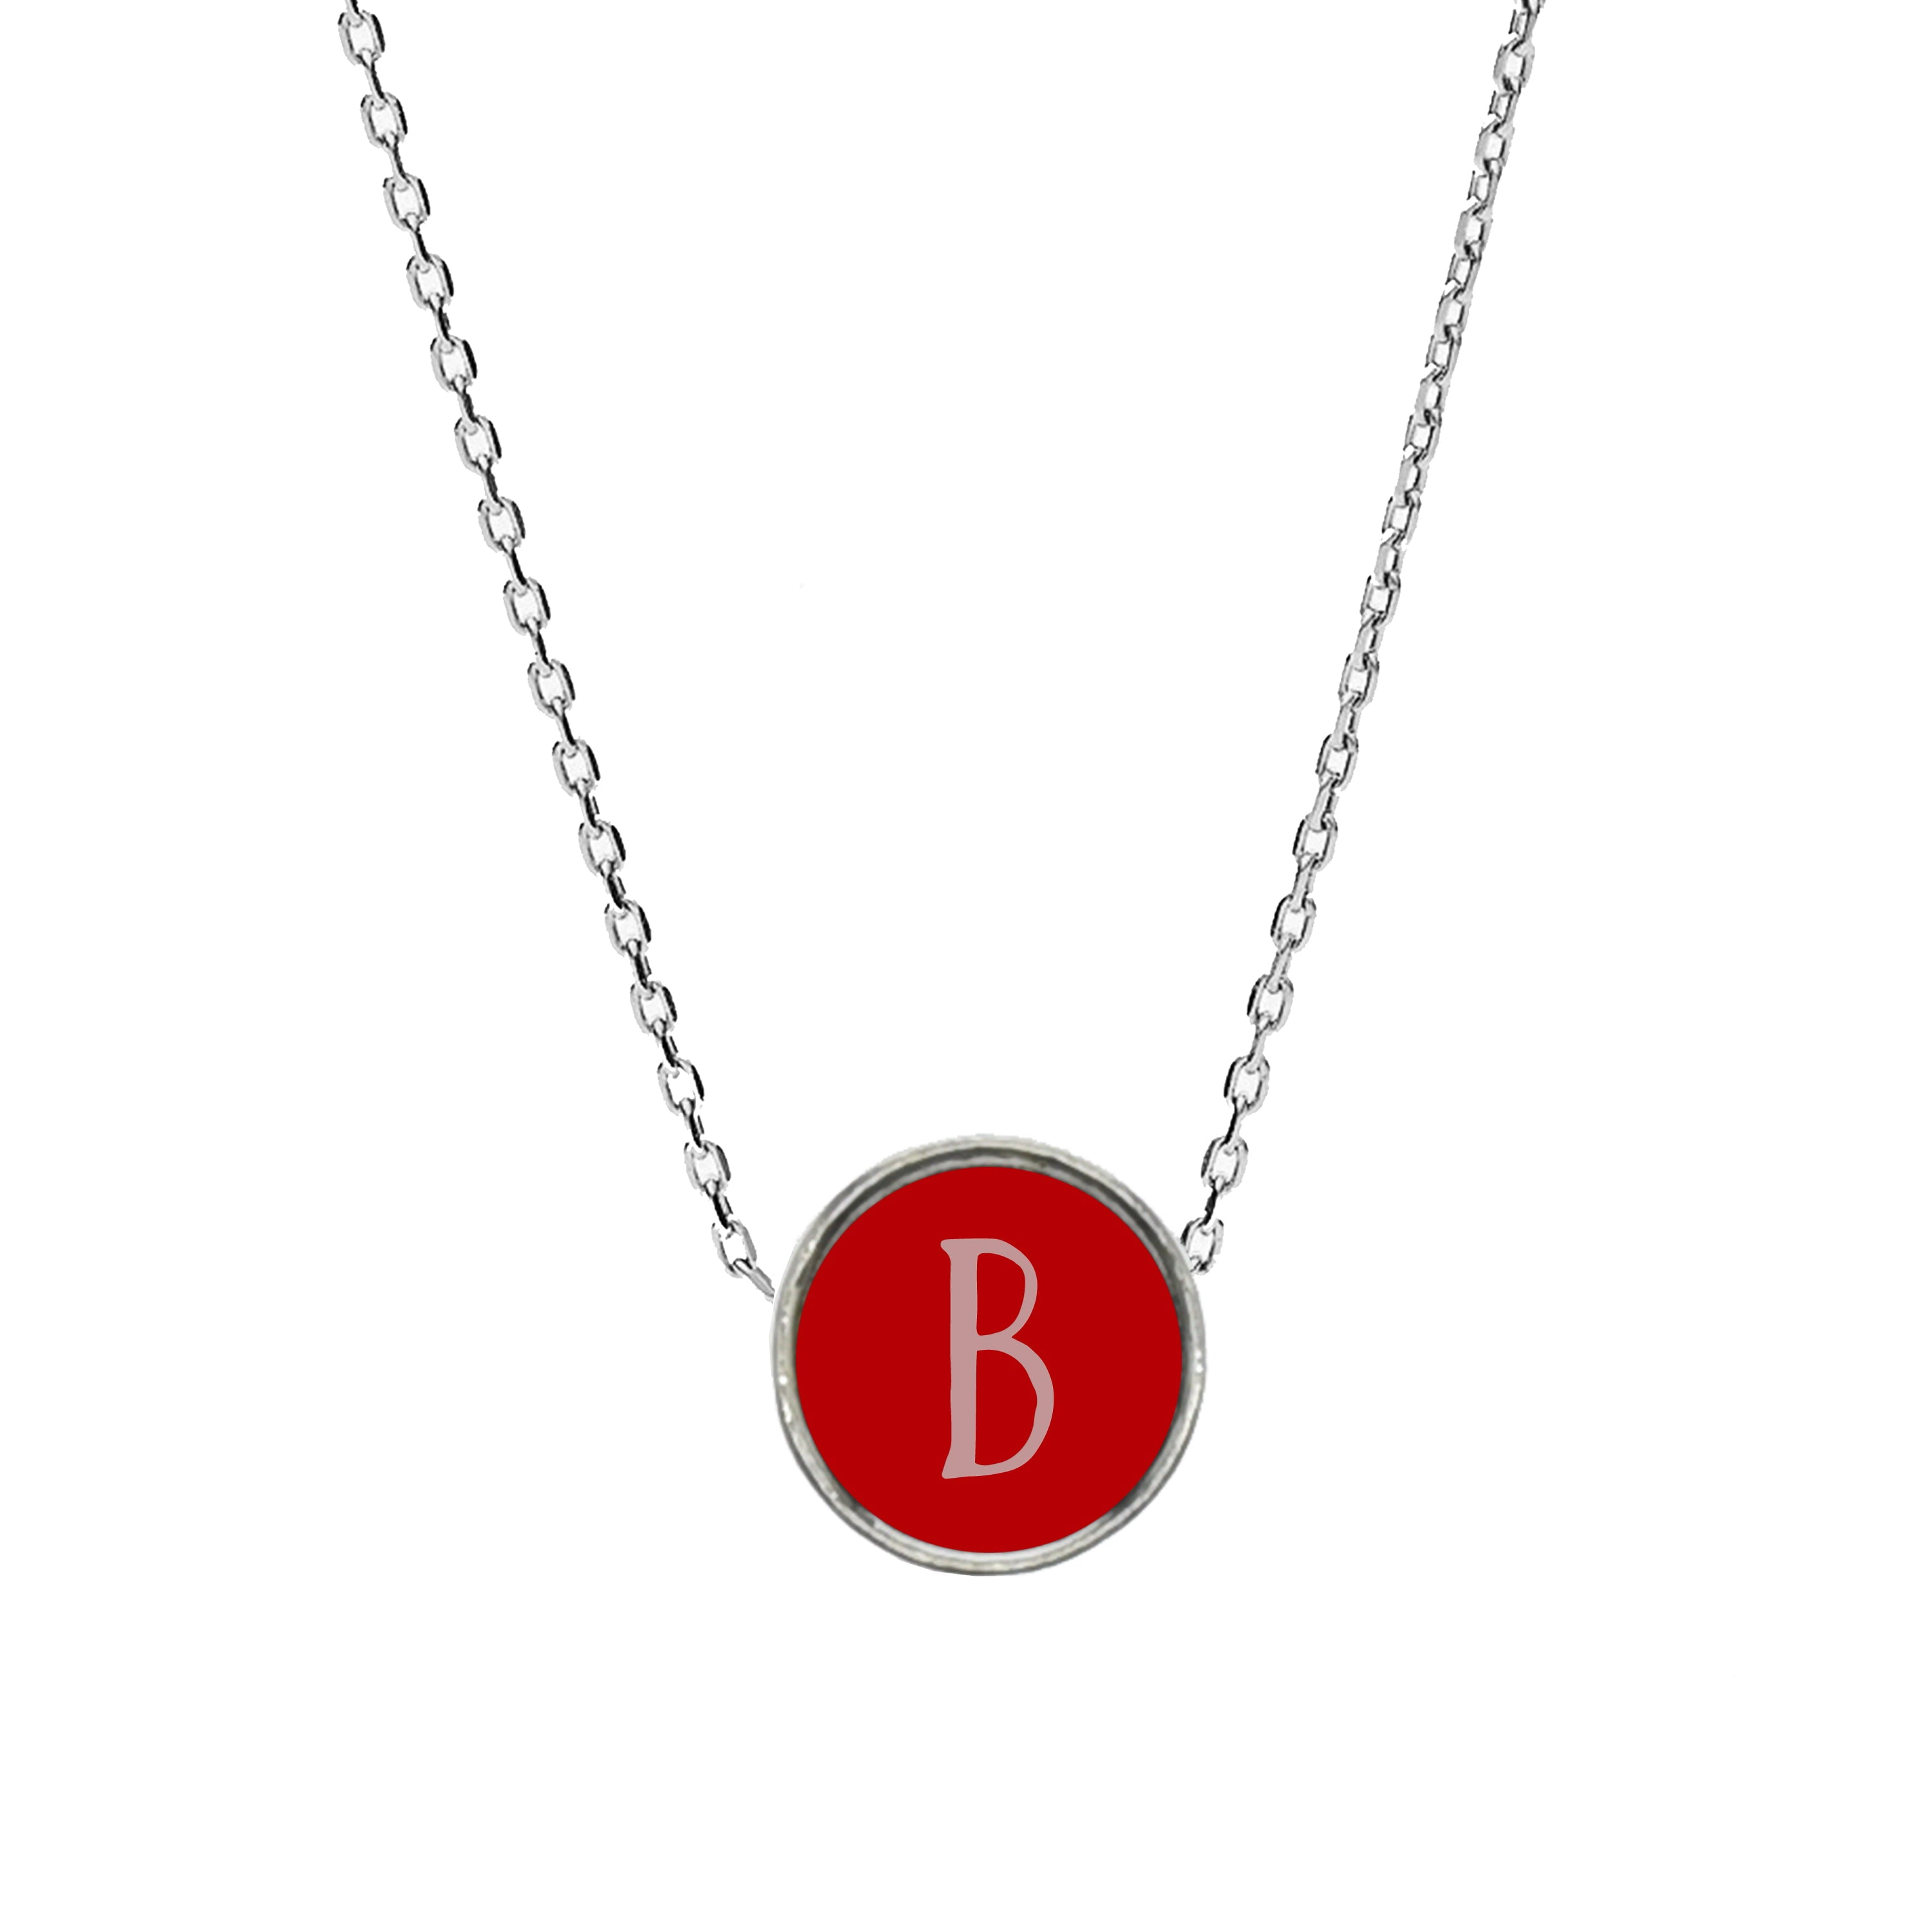 Reversible Round Initial Necklace By Pink Box in Silver Tone - Red